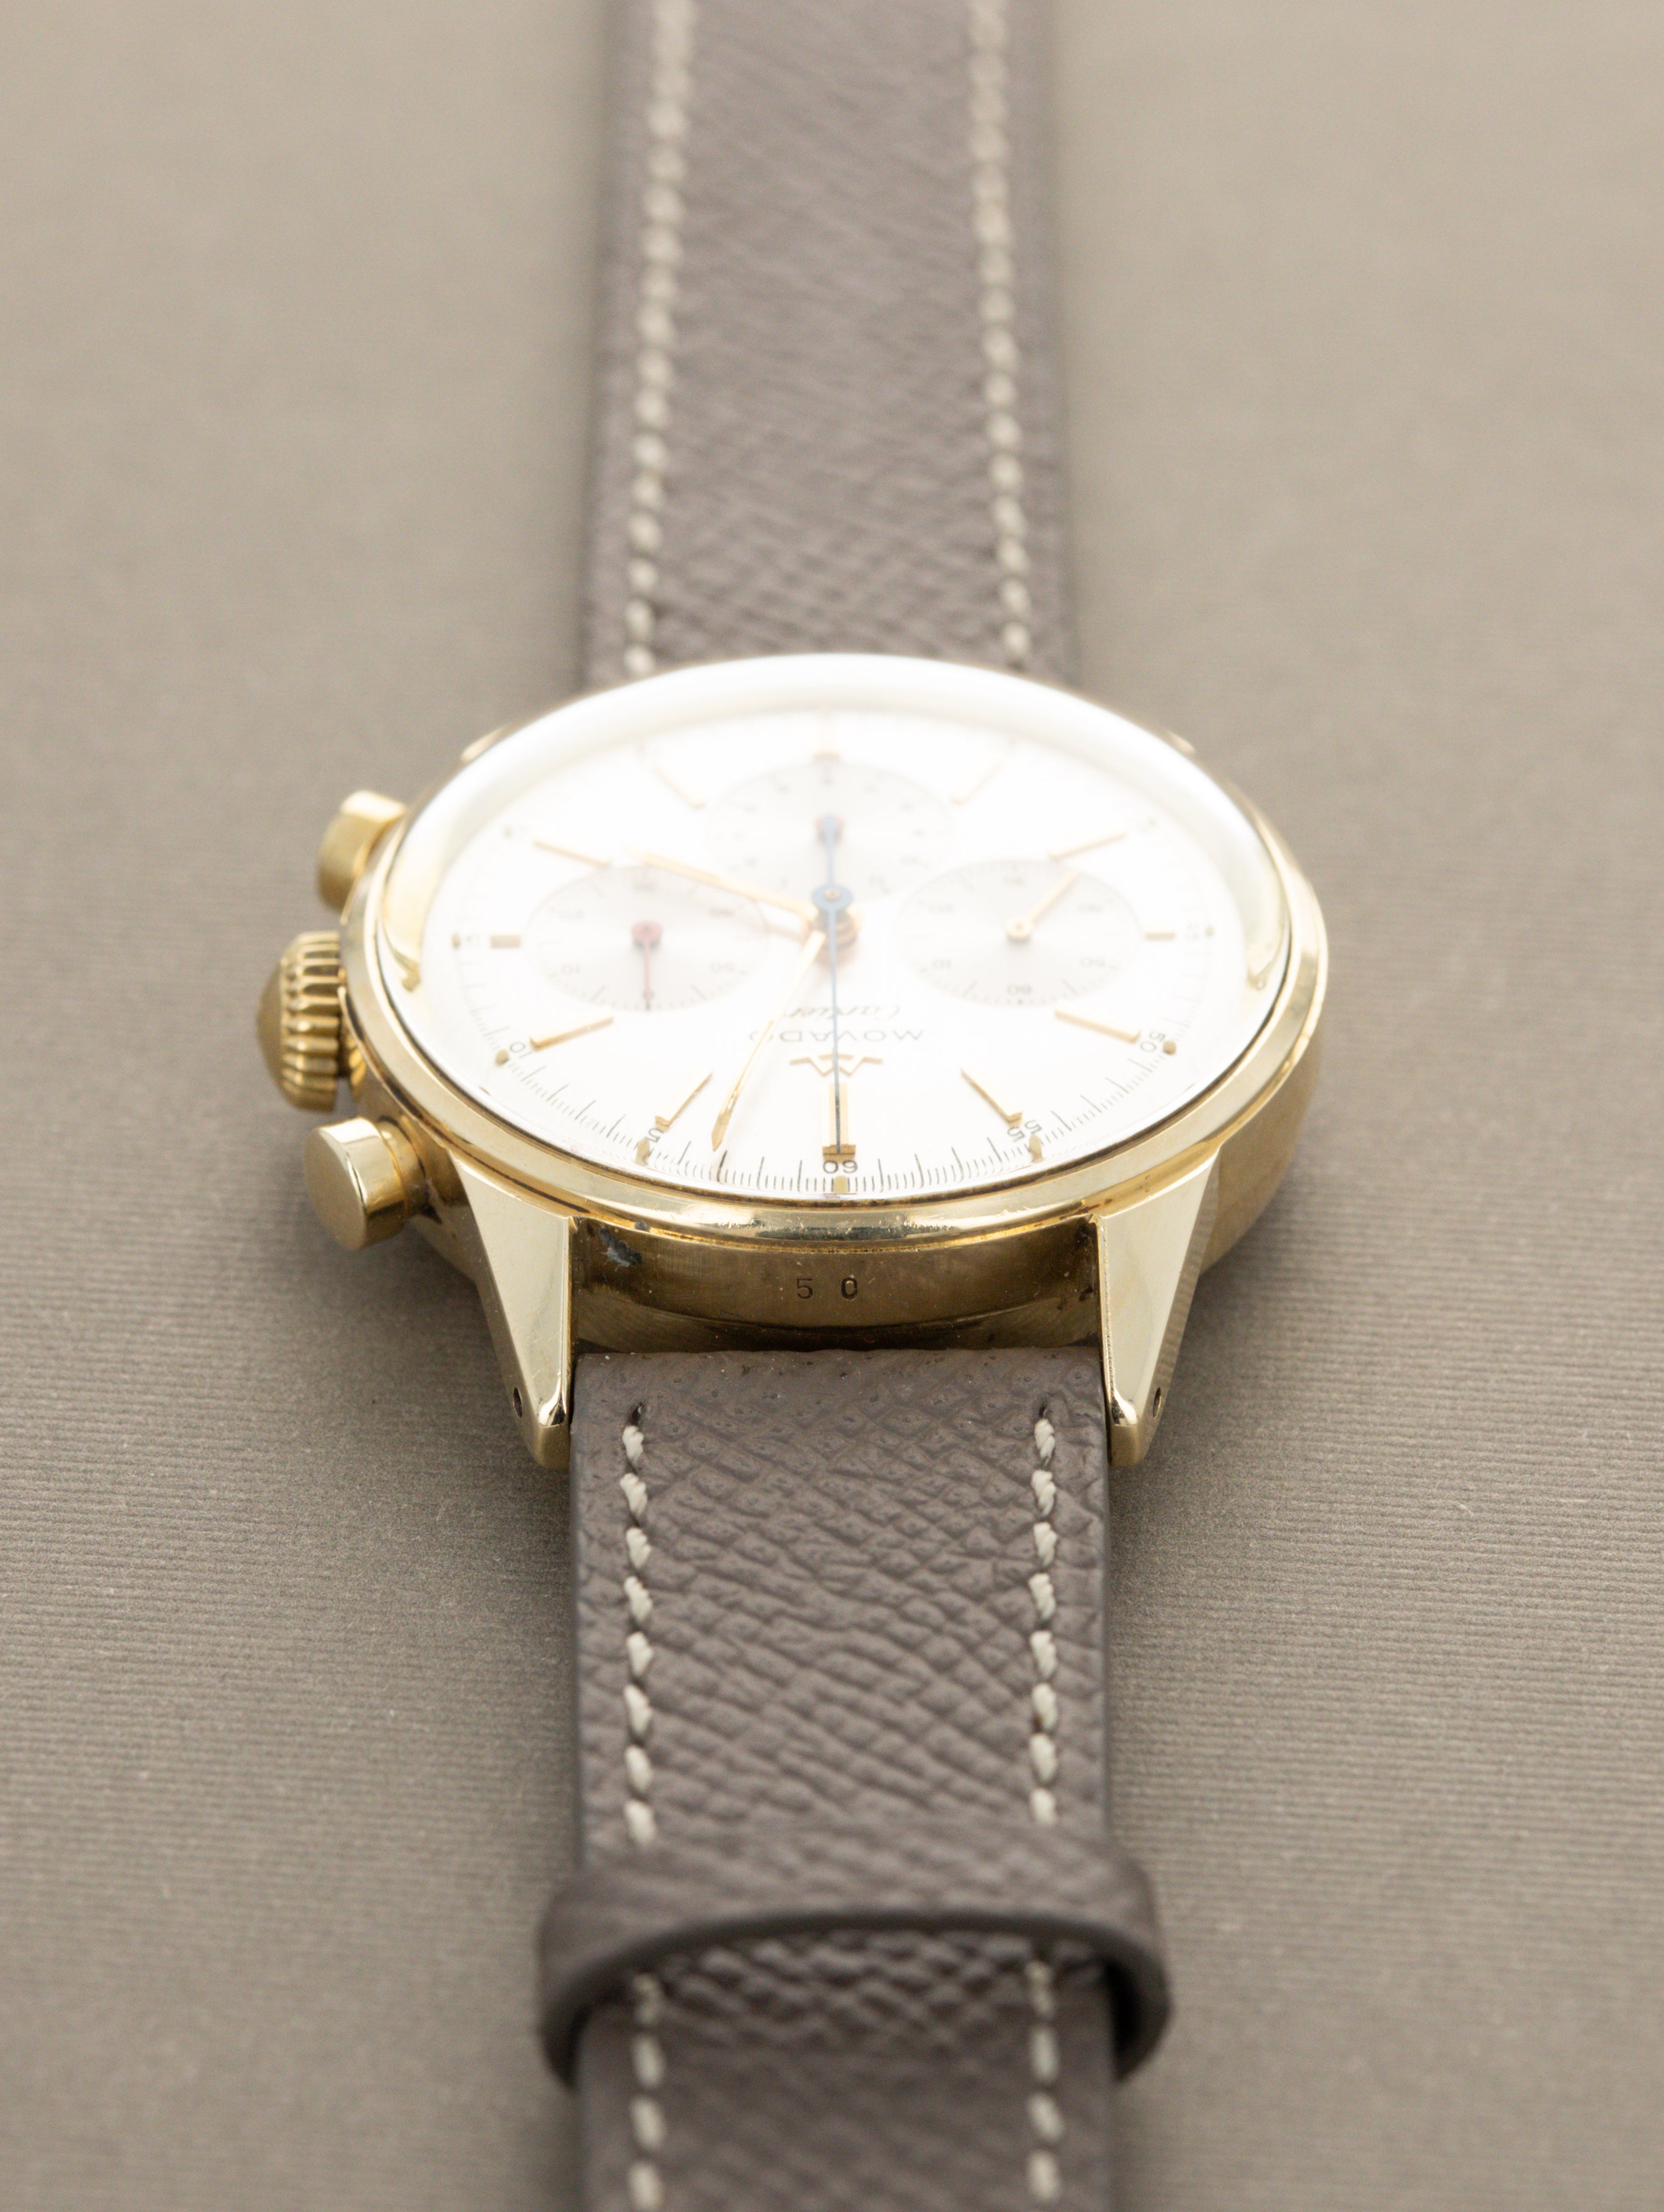 Movado M95 Chronograph - Retailed by Cartier